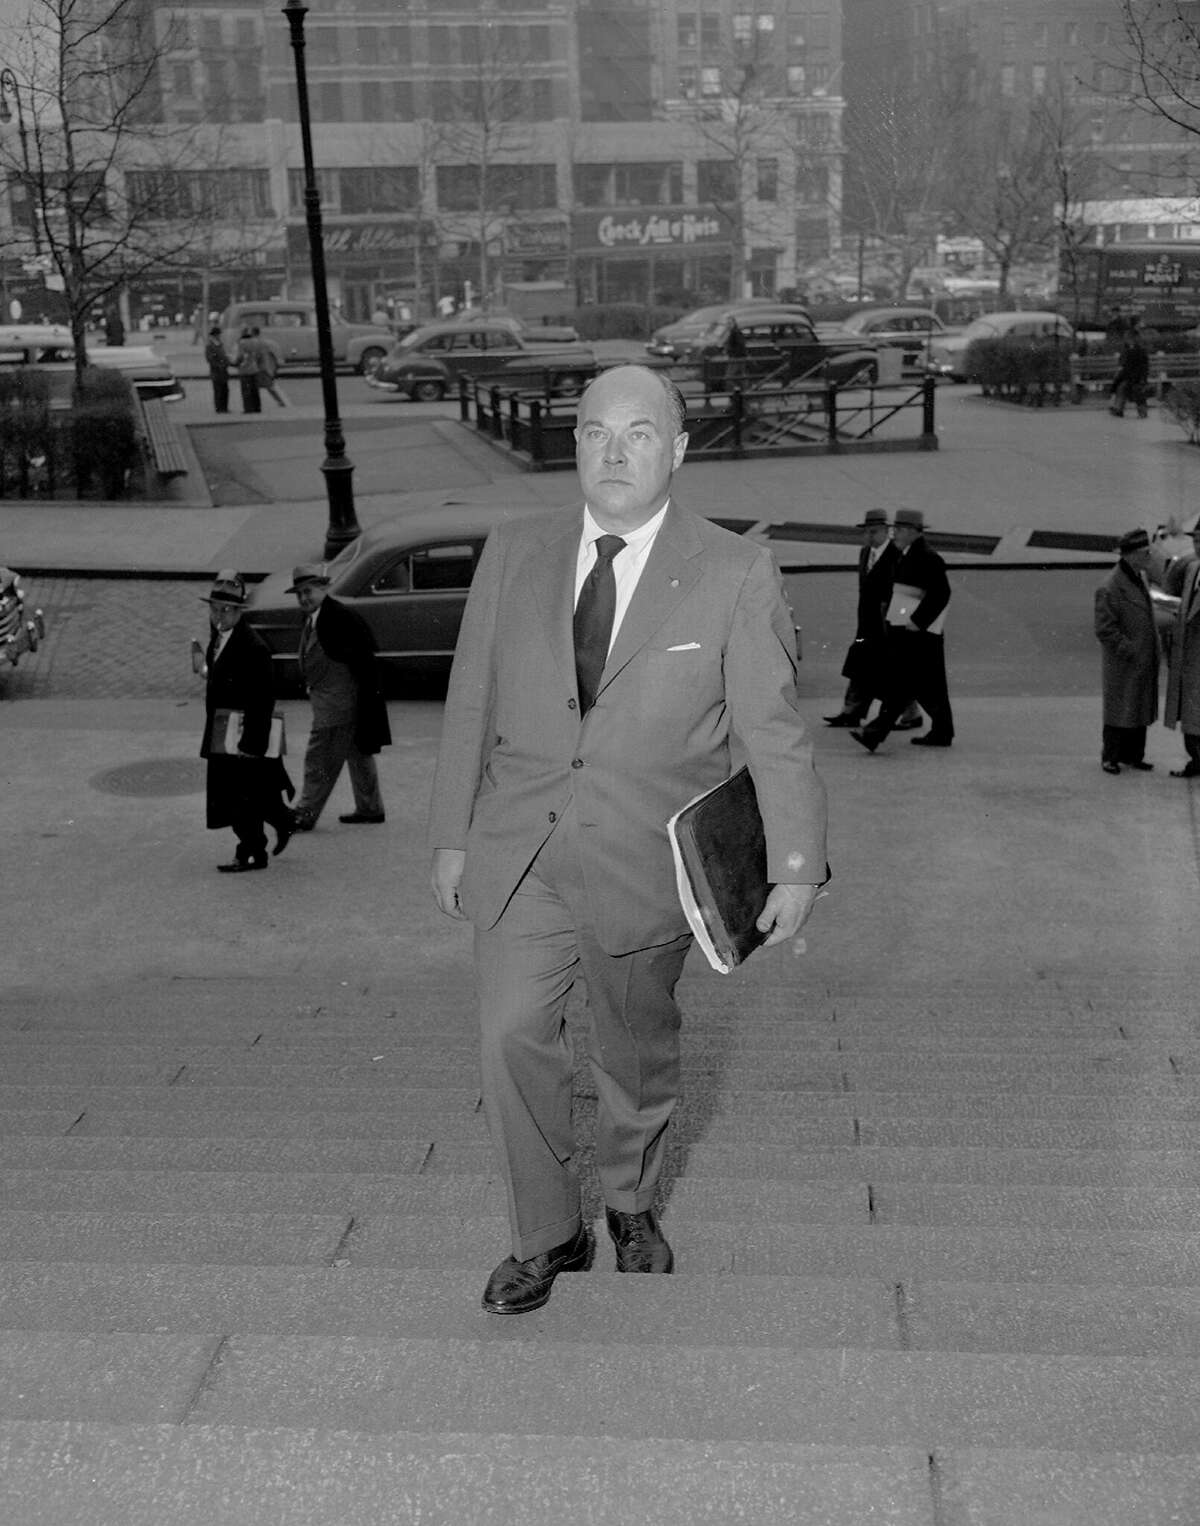 FILE: An undated photo shows George Hunter White, supervisor for the New England area of the Federal Bureau of Narcotics, as he enters federal court to go before a grand jury.